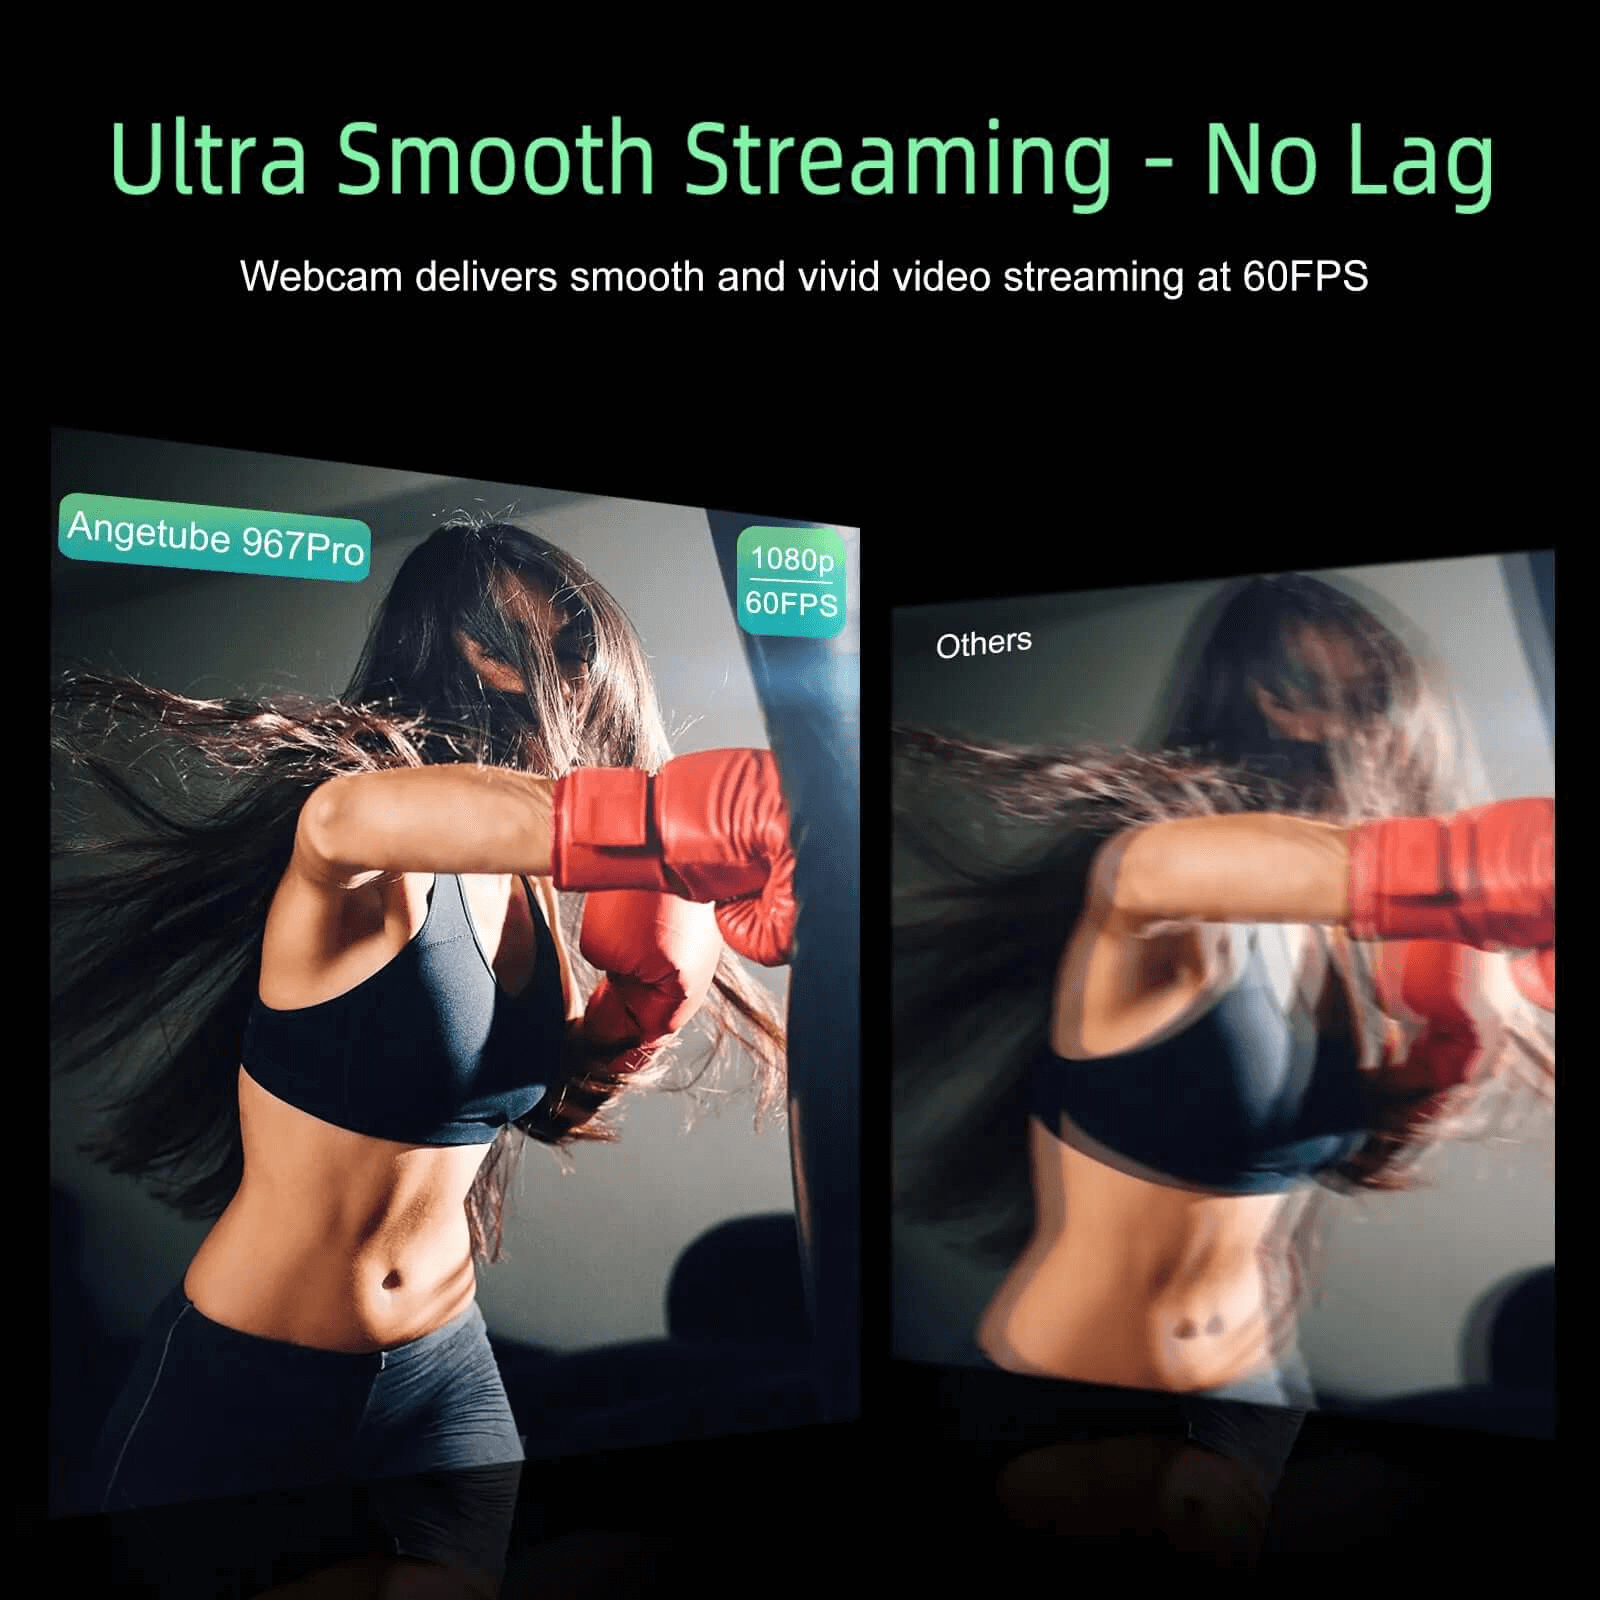 Ultra Smooth Streaming